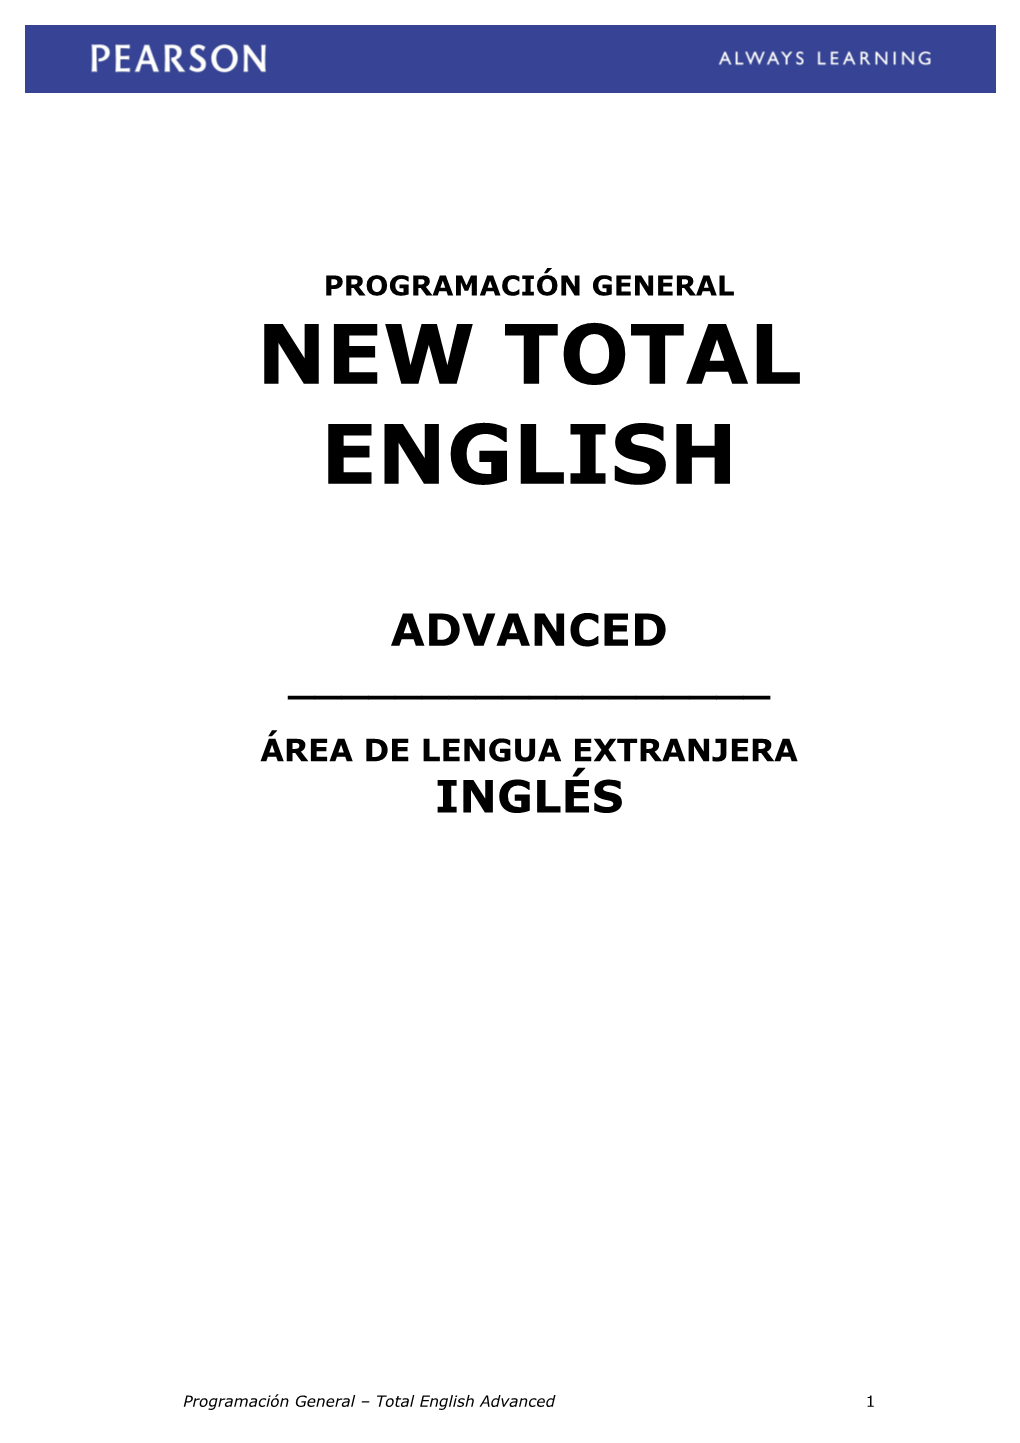 New Total English